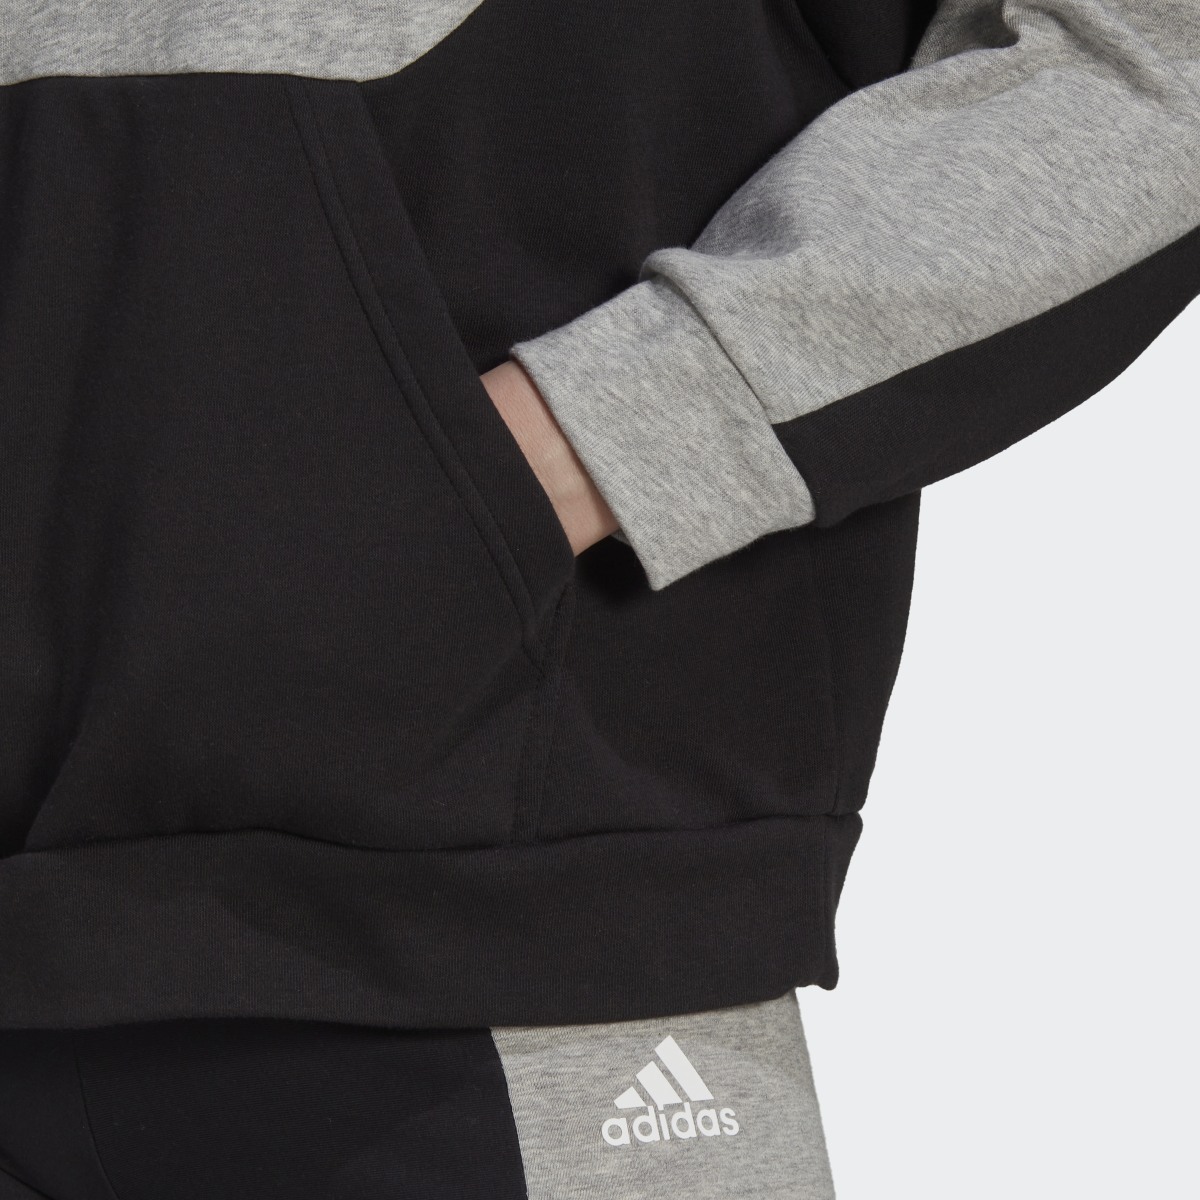 Adidas Half-Zip and Tights Tracksuit. 9